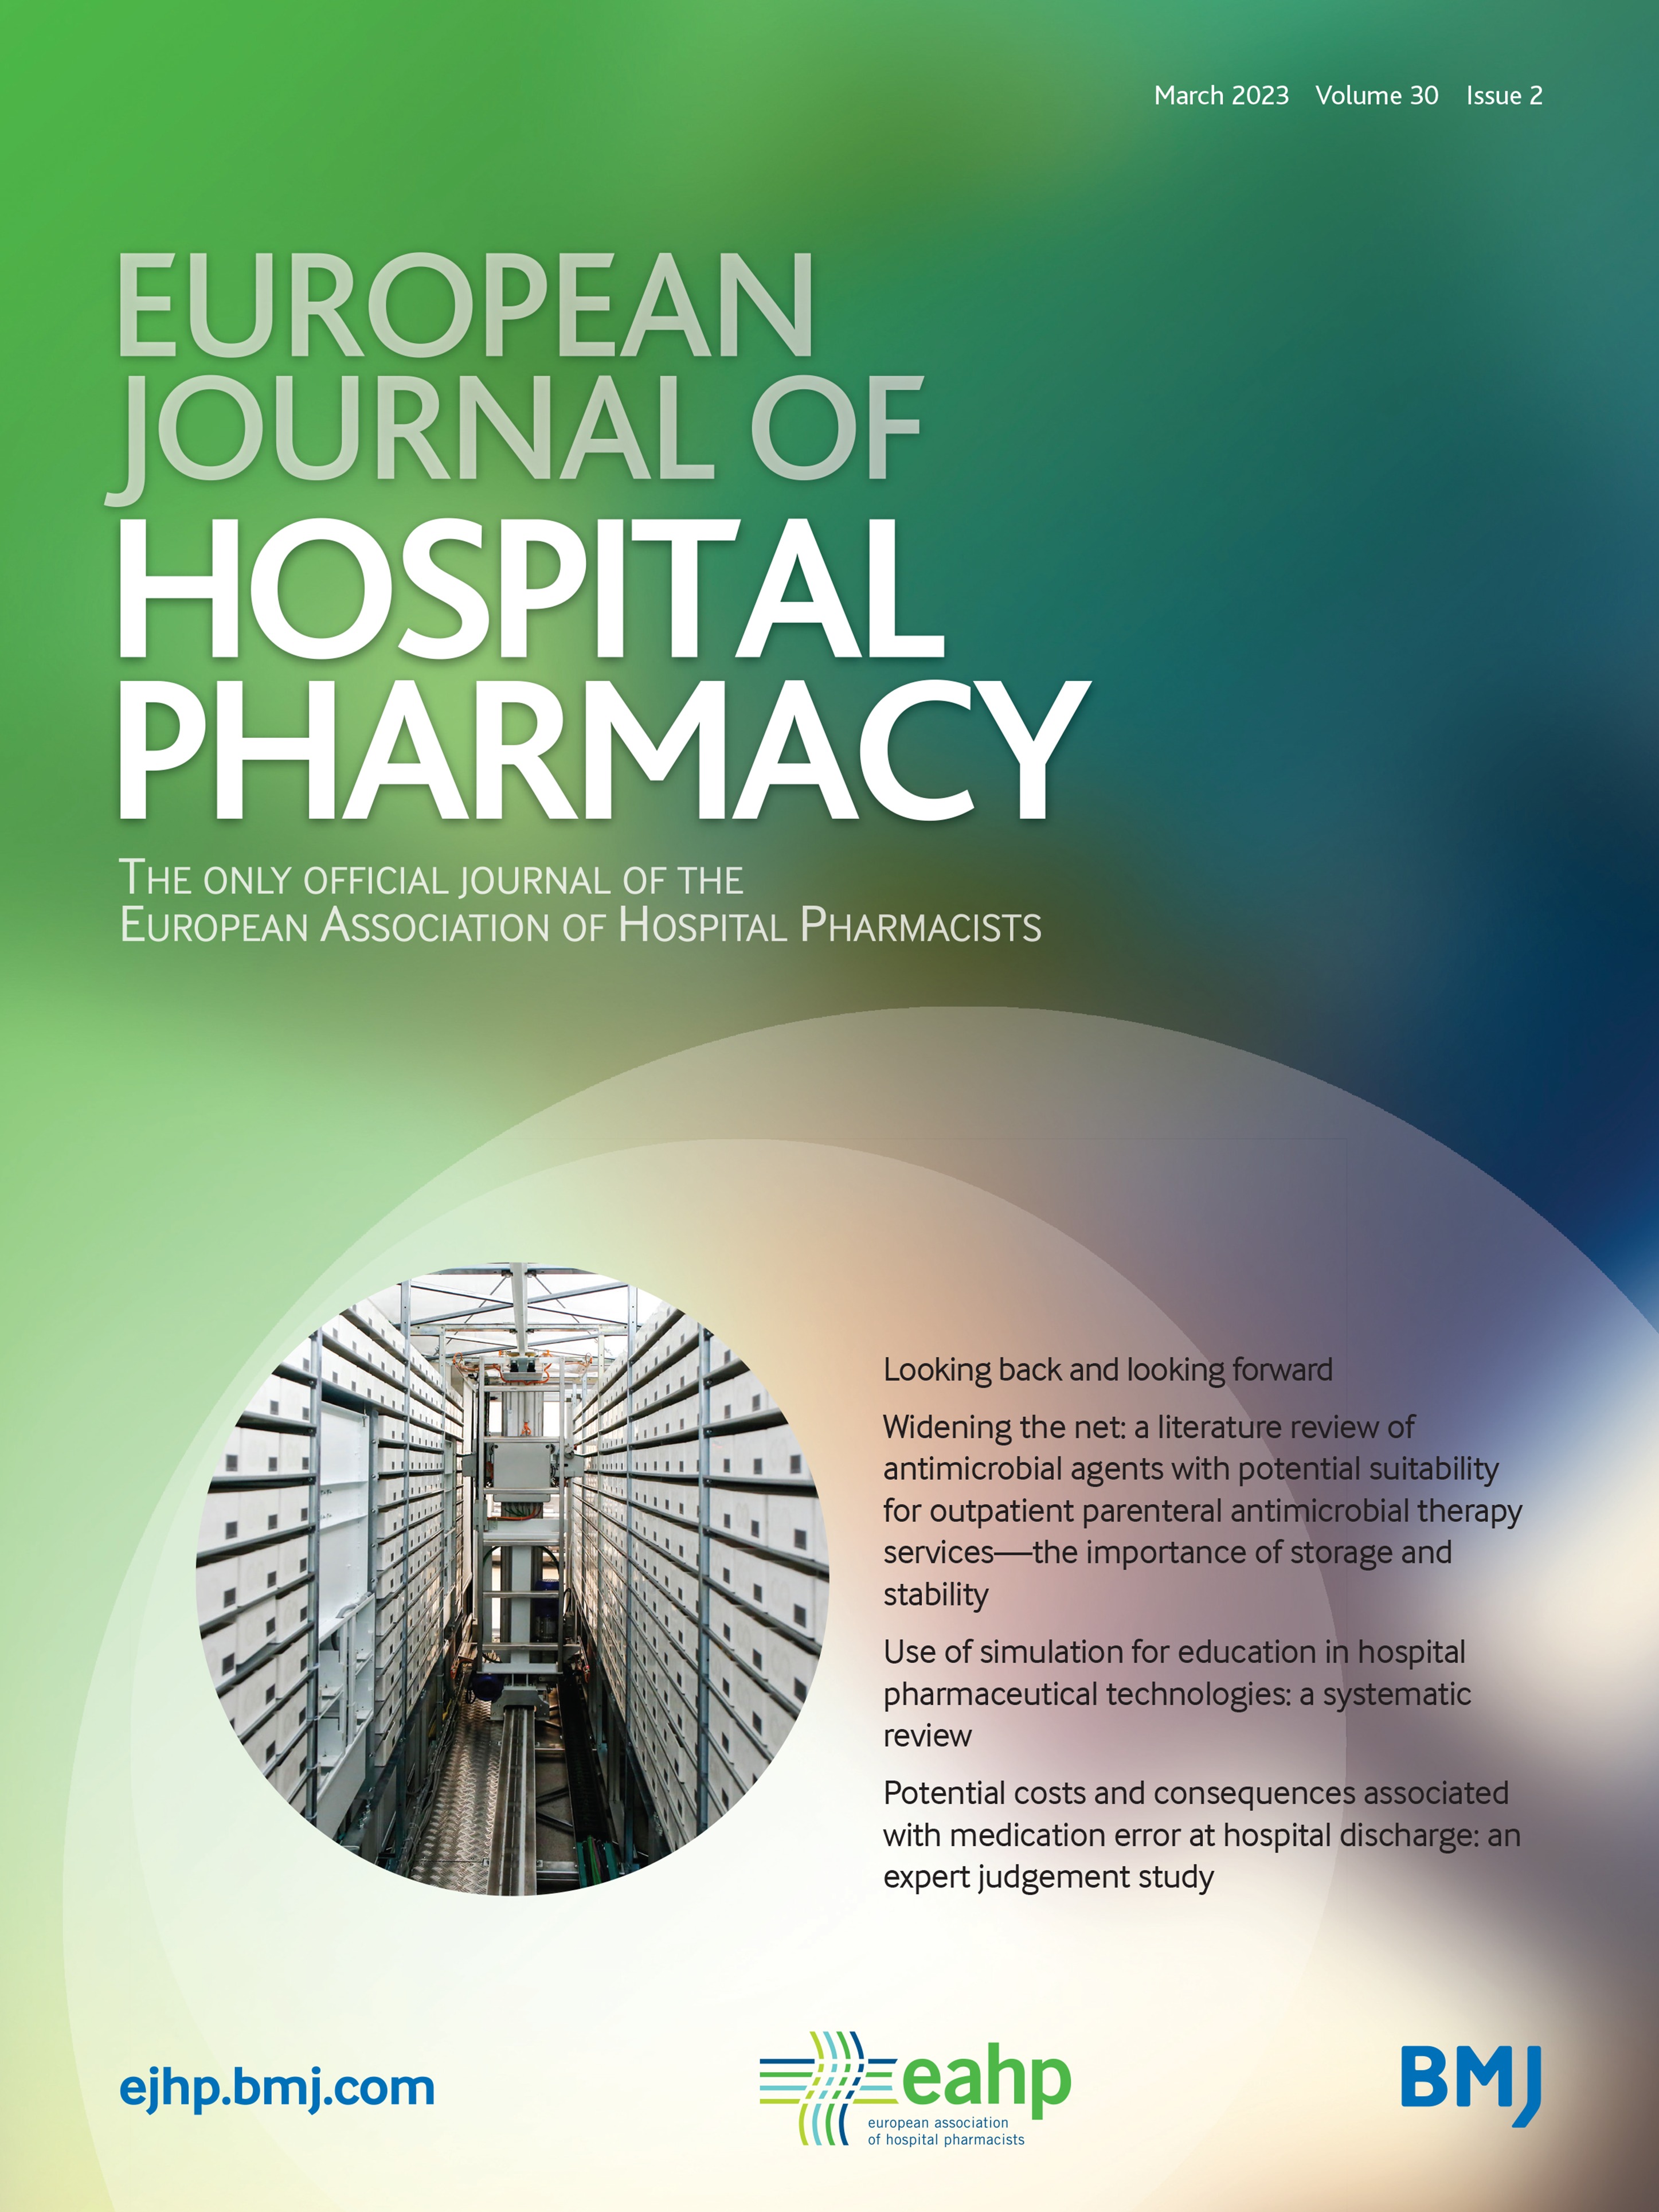 Electronic monitoring of potential adverse drug events related to lopinavir/ritonavir and hydroxychloroquine during the first wave of COVID-19